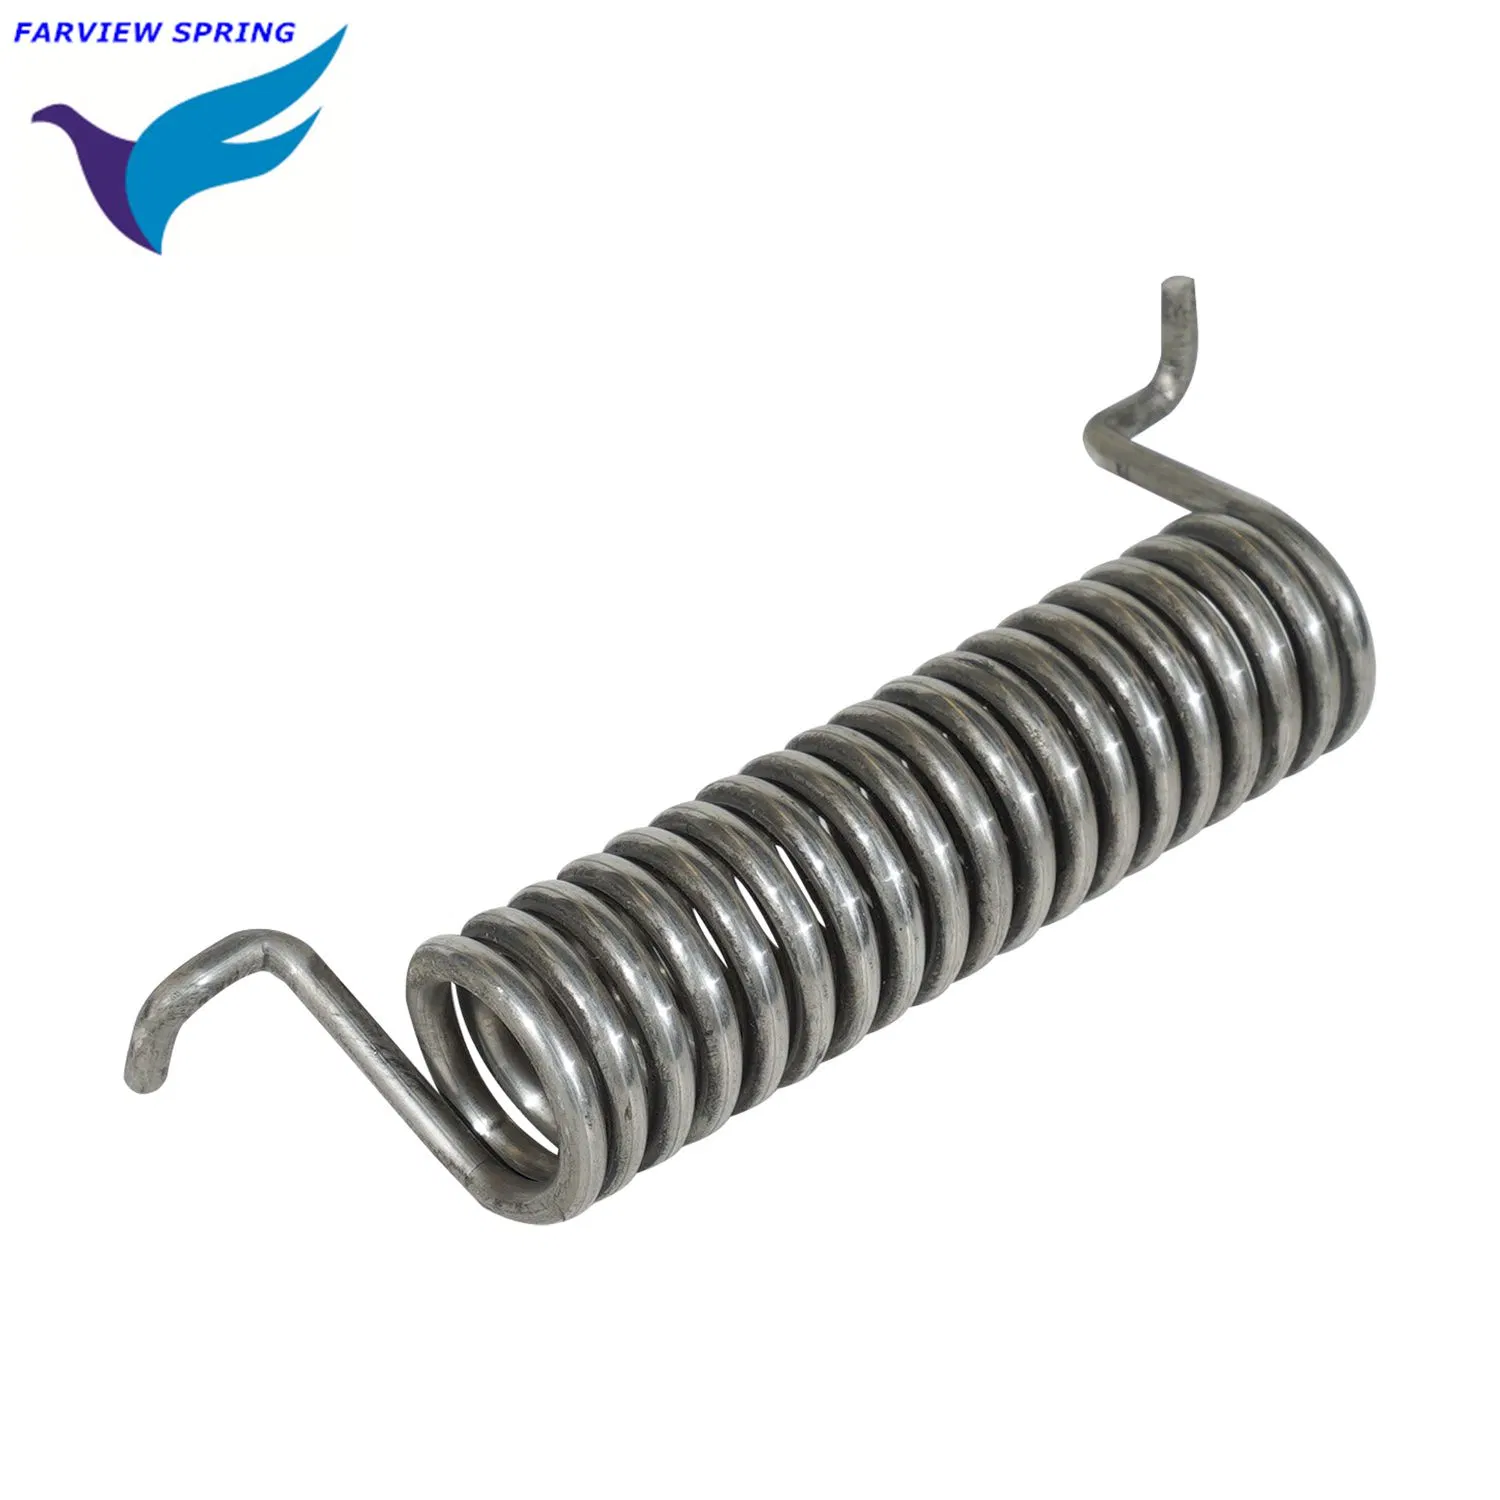 Automobile Machinery Accessories and Parts Steel Wire Bending Forming Spiral Spring Helical Torsion Springs Manufacturer